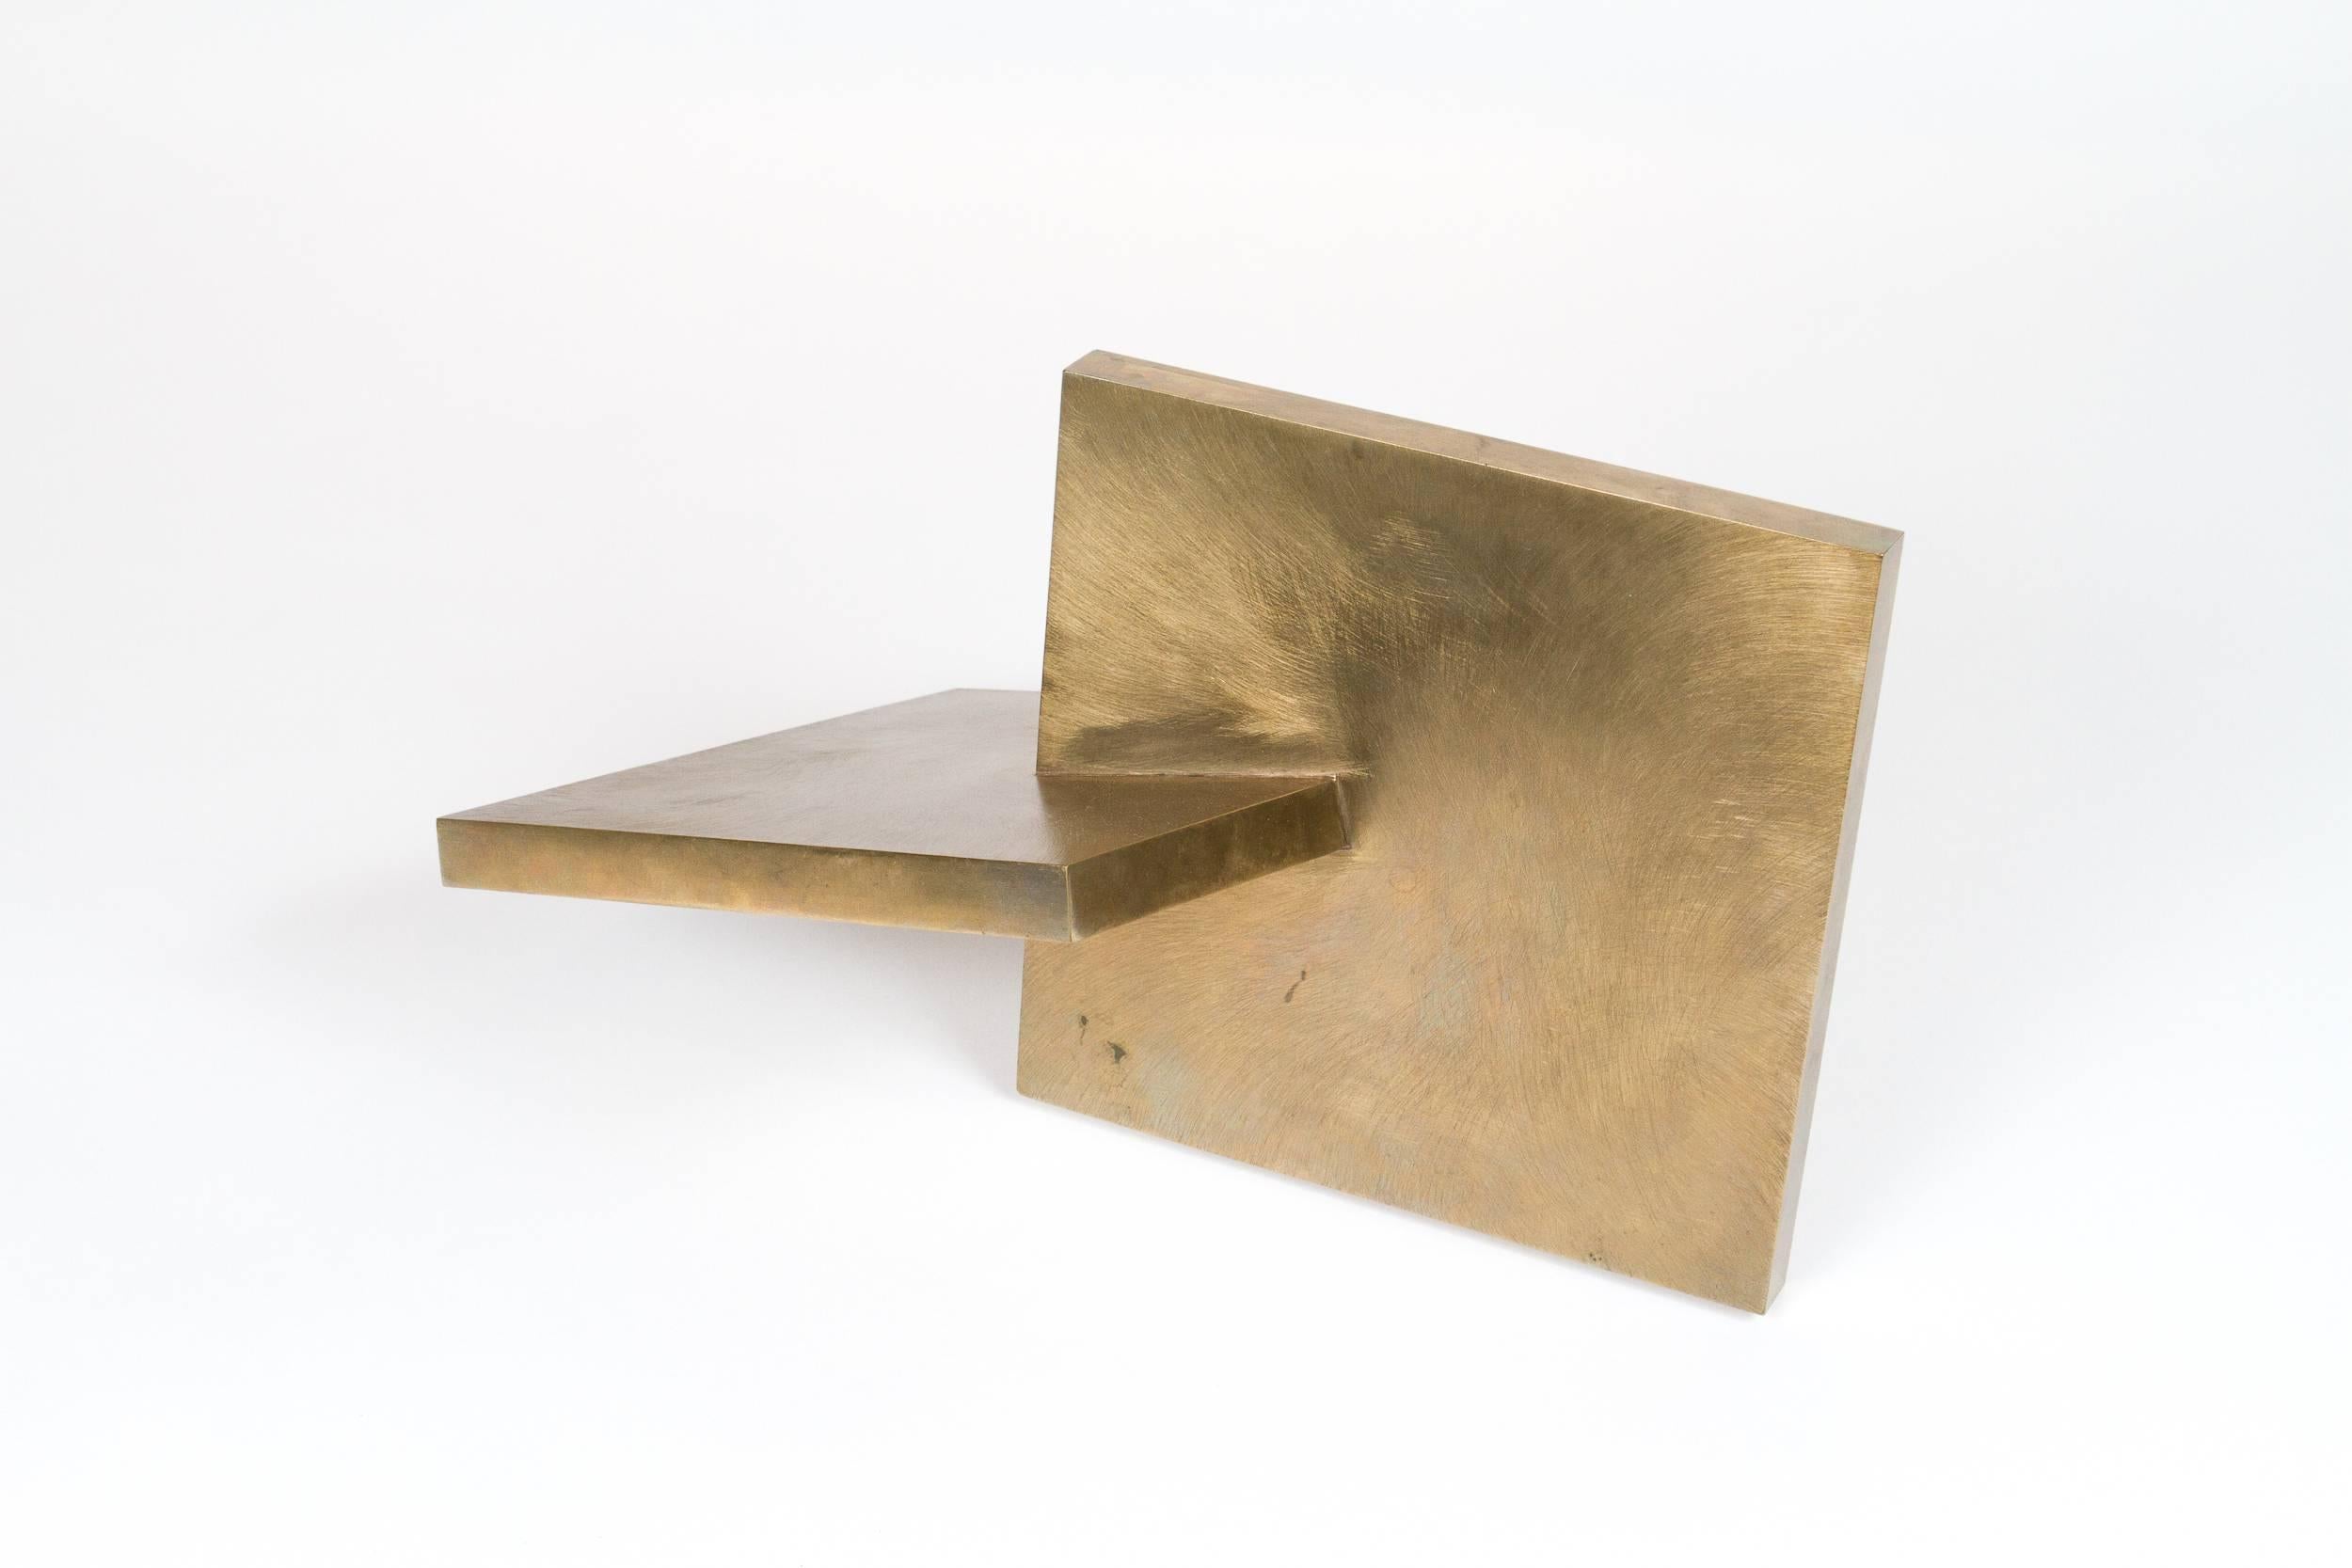 Beautiful Minimalist abstract bronze sculpture by Gord Smith. Smith, born 1937 is an important Canadian artist. His monumental work Canada Screen, was commissioned by the Canadian government for their pavilion at Expo 67. He was collaborated with